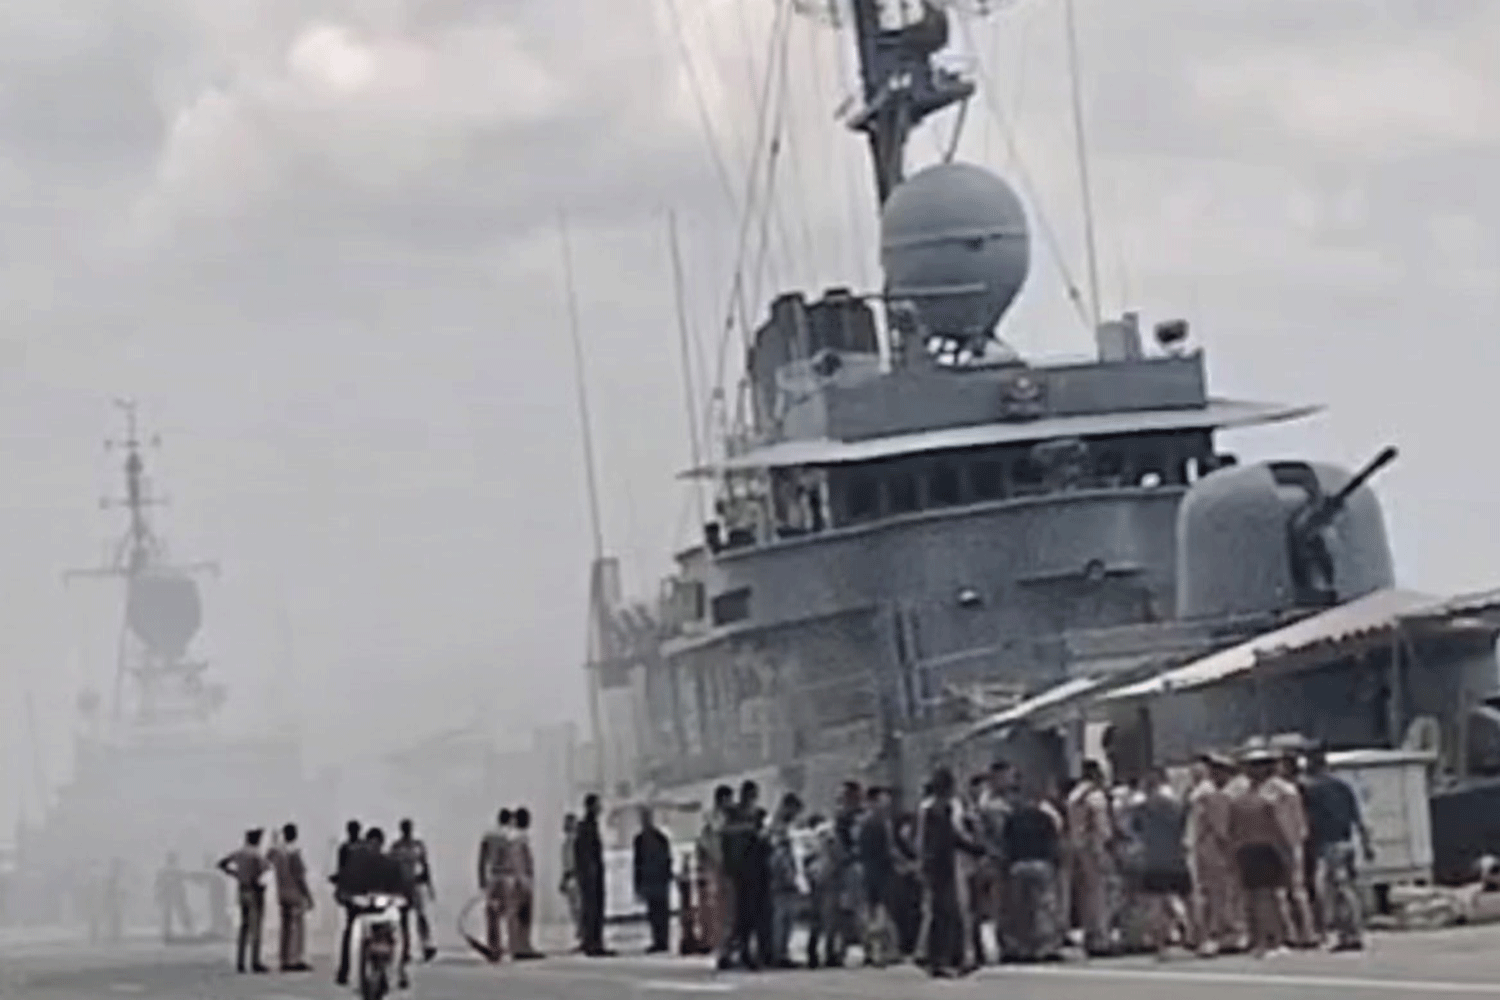 Navy Ship Mistakenly Fires on Another Vessel in Thailand